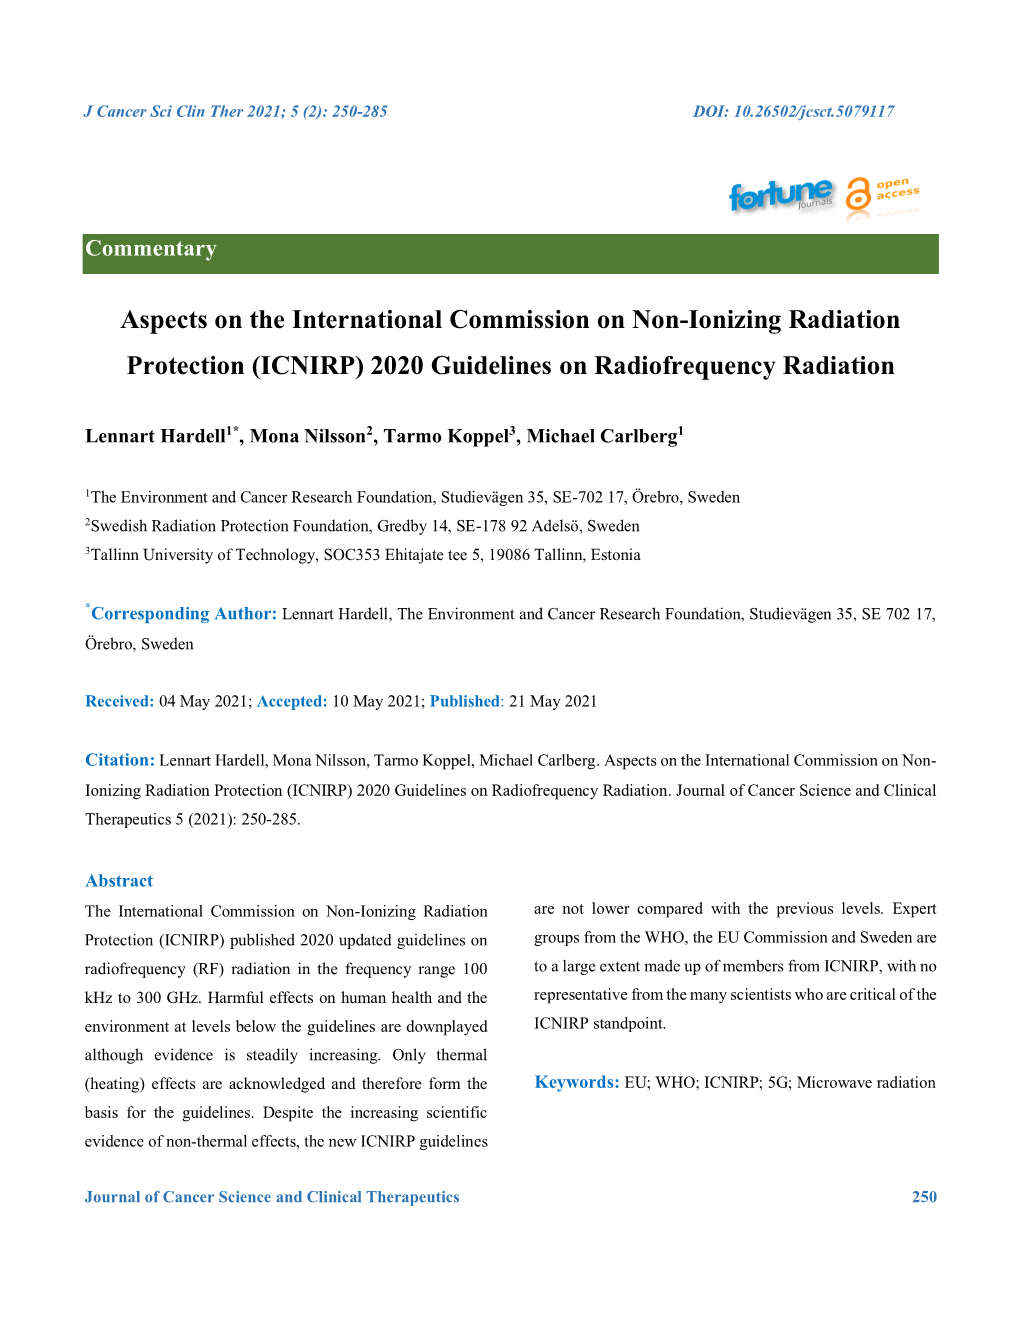 ICNIRP) 2020 Guidelines on Radiofrequency Radiation